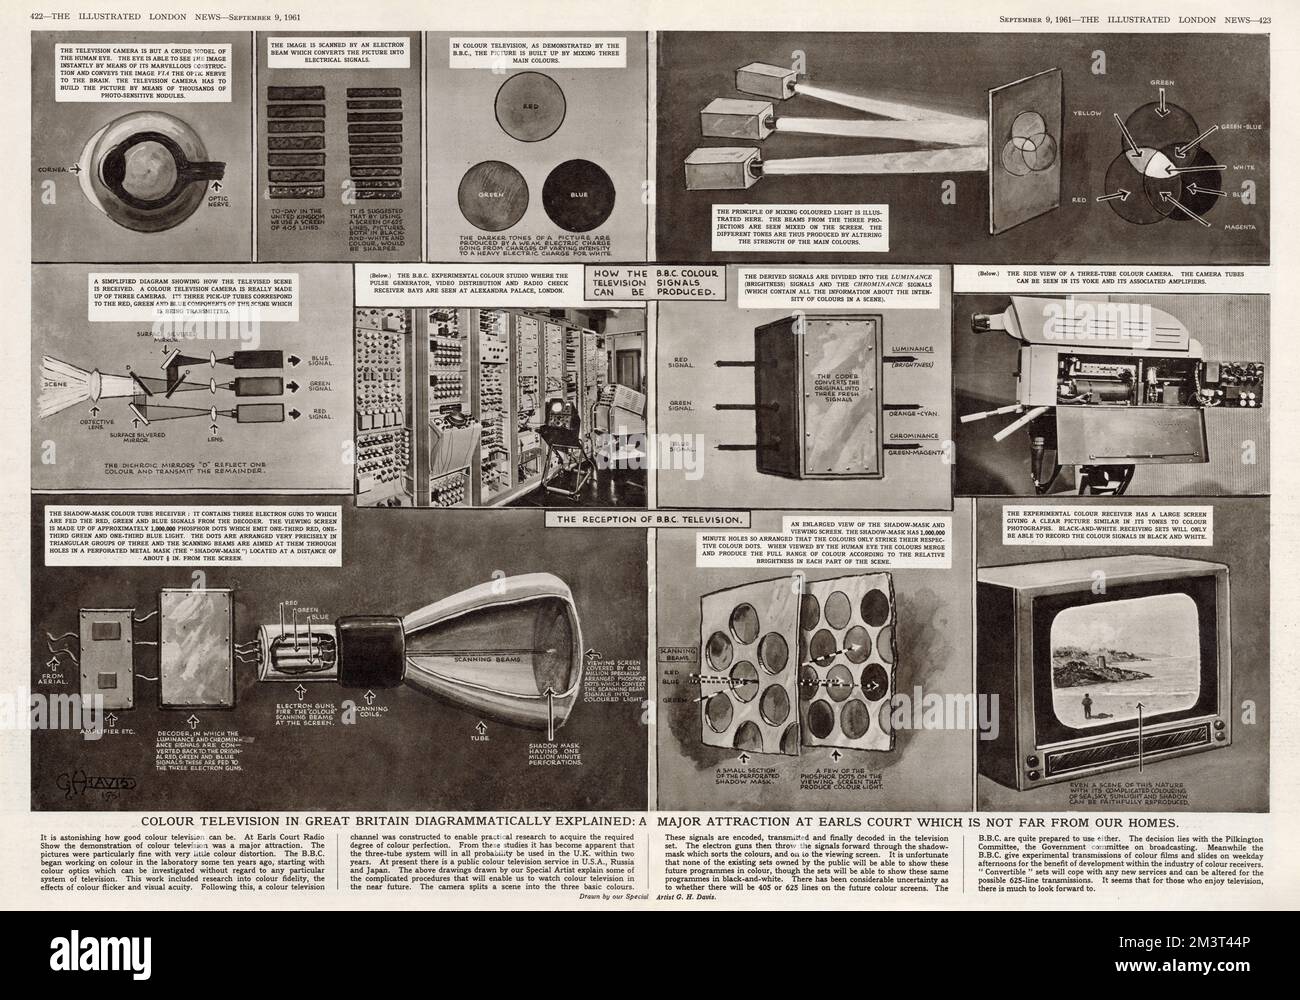 Infographic diagram by ILN special artist G. H. Davis in The Illustrated London News, explaining how colour television works. Demonstrated at the Earls Court radio show that year. Stock Photo